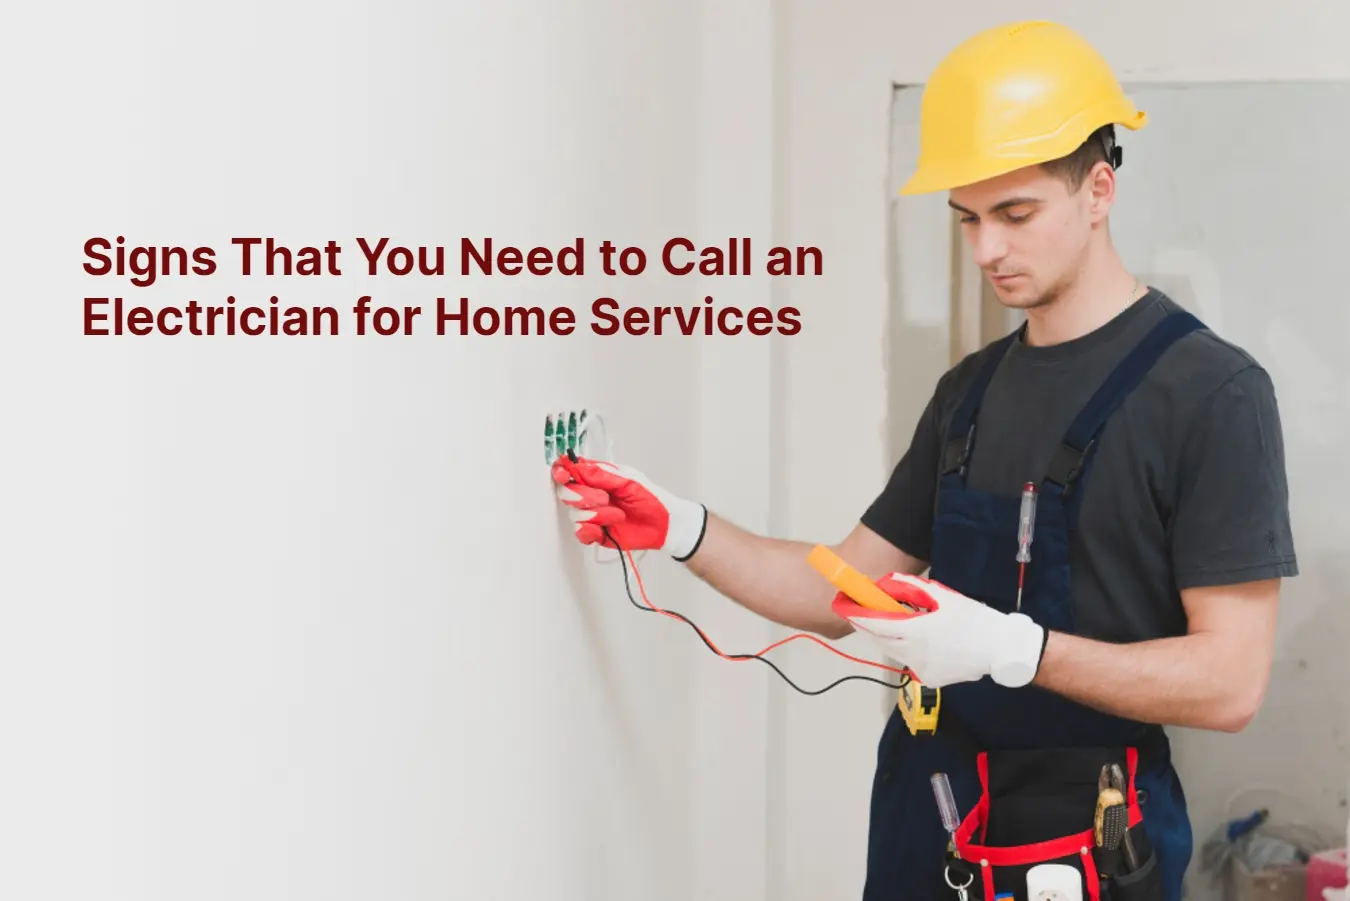 Signs That You Need to Call an Electrician for Home Services